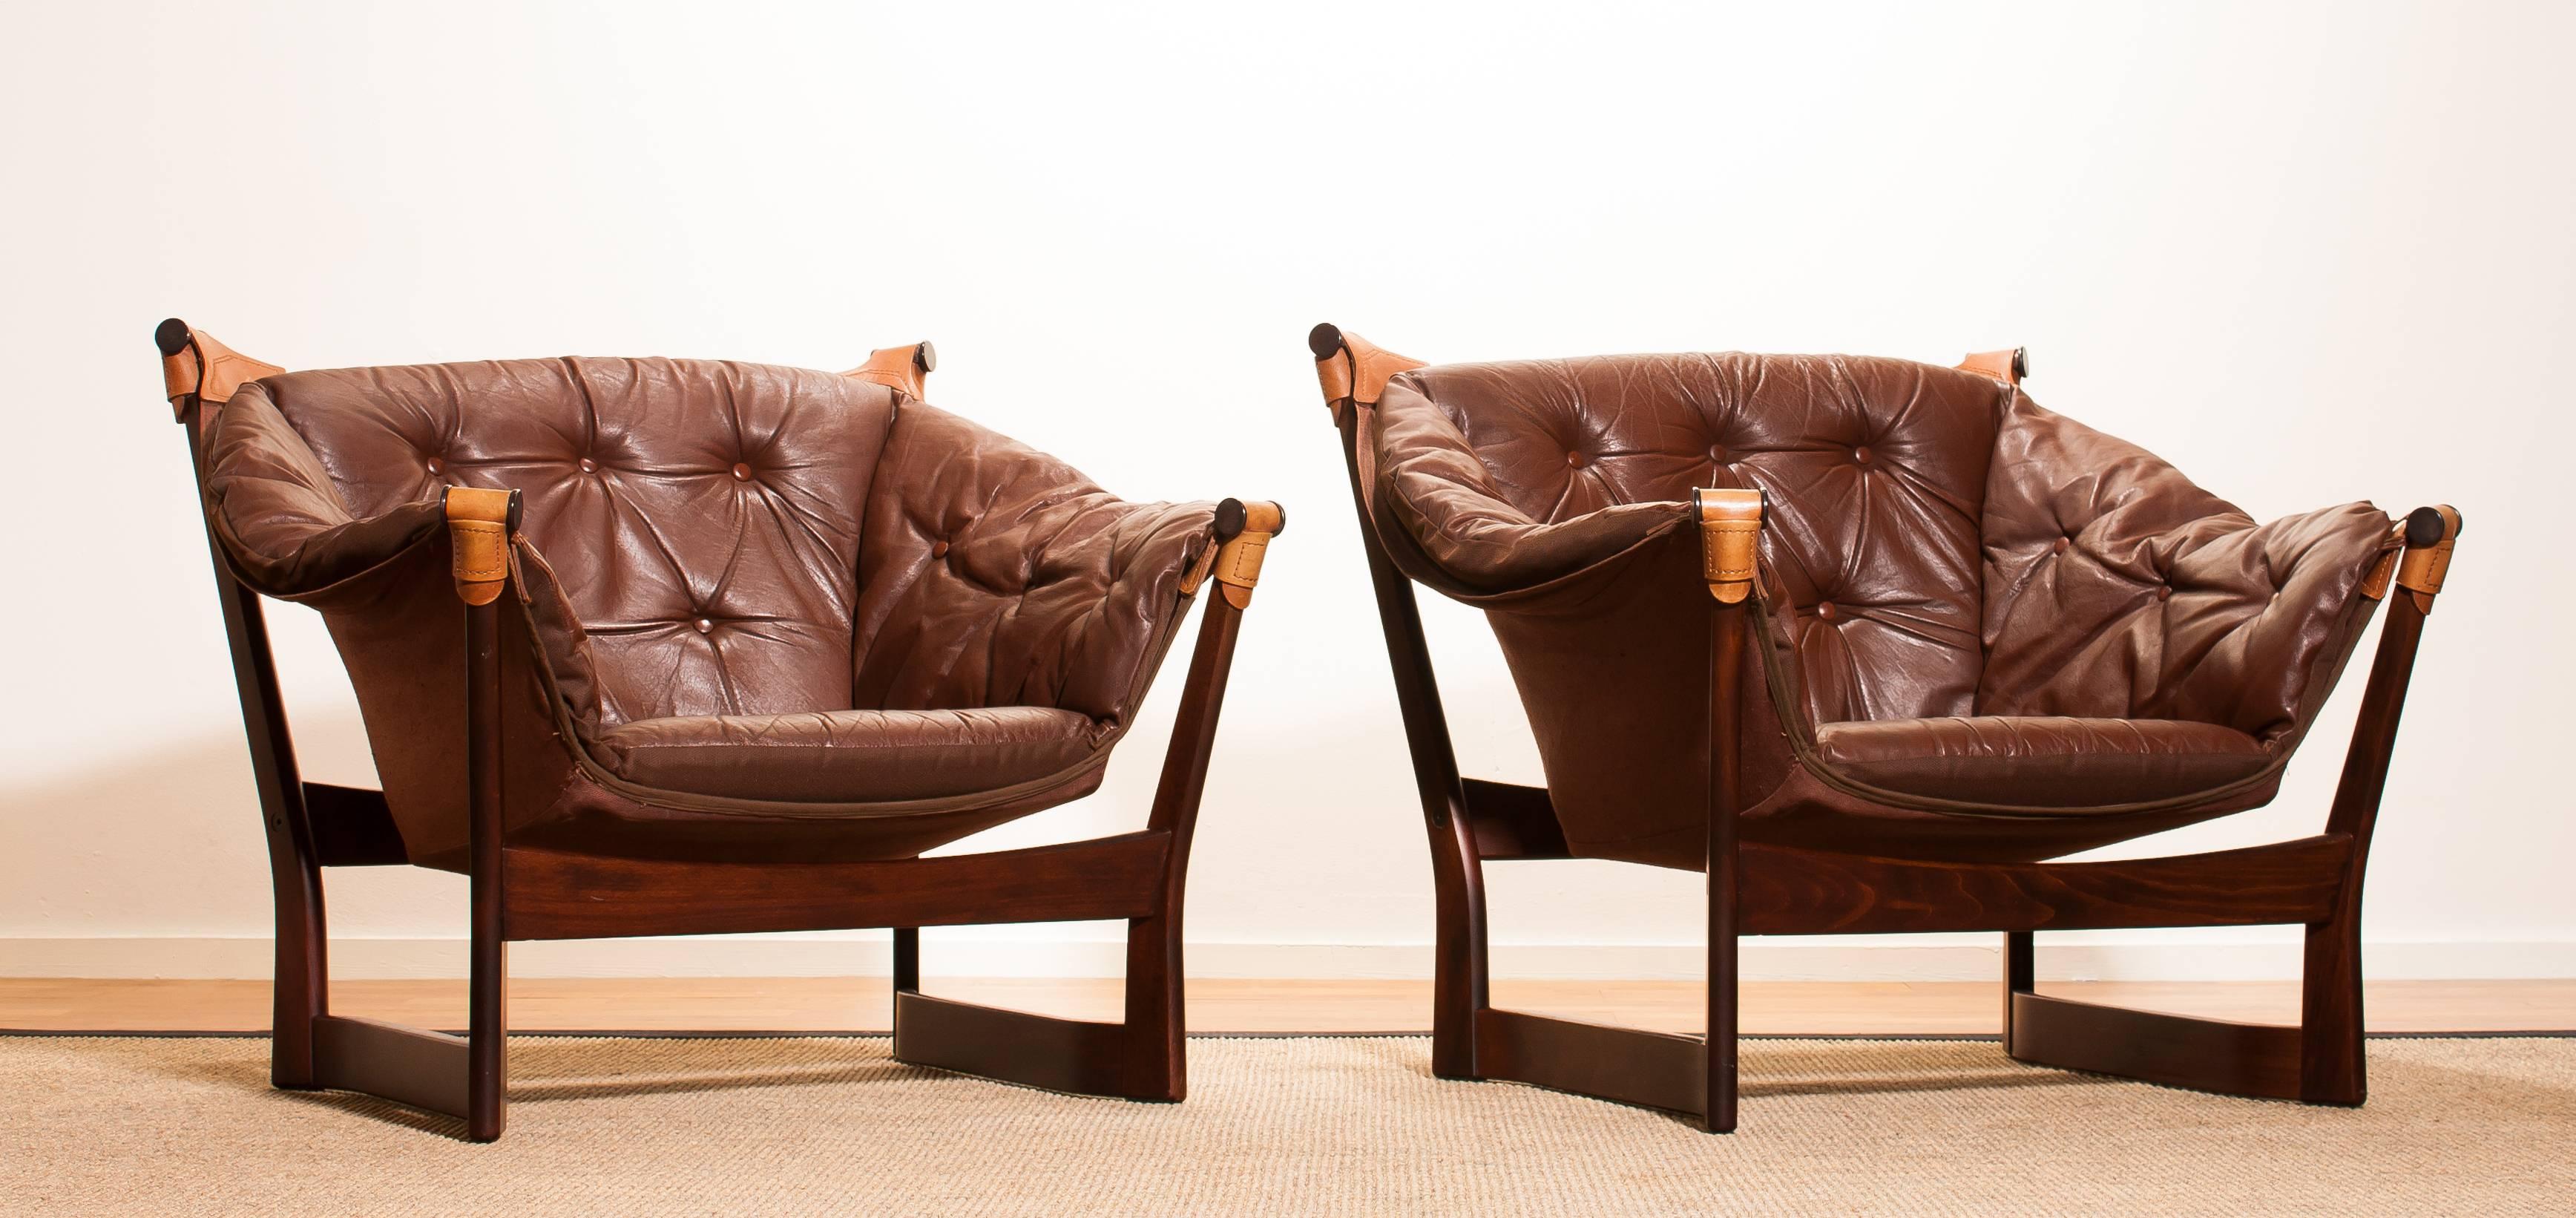 1950s, Teak and Leather Pair 'Trega' Chairs by Tormod Alnaes for Sørliemøbler 7